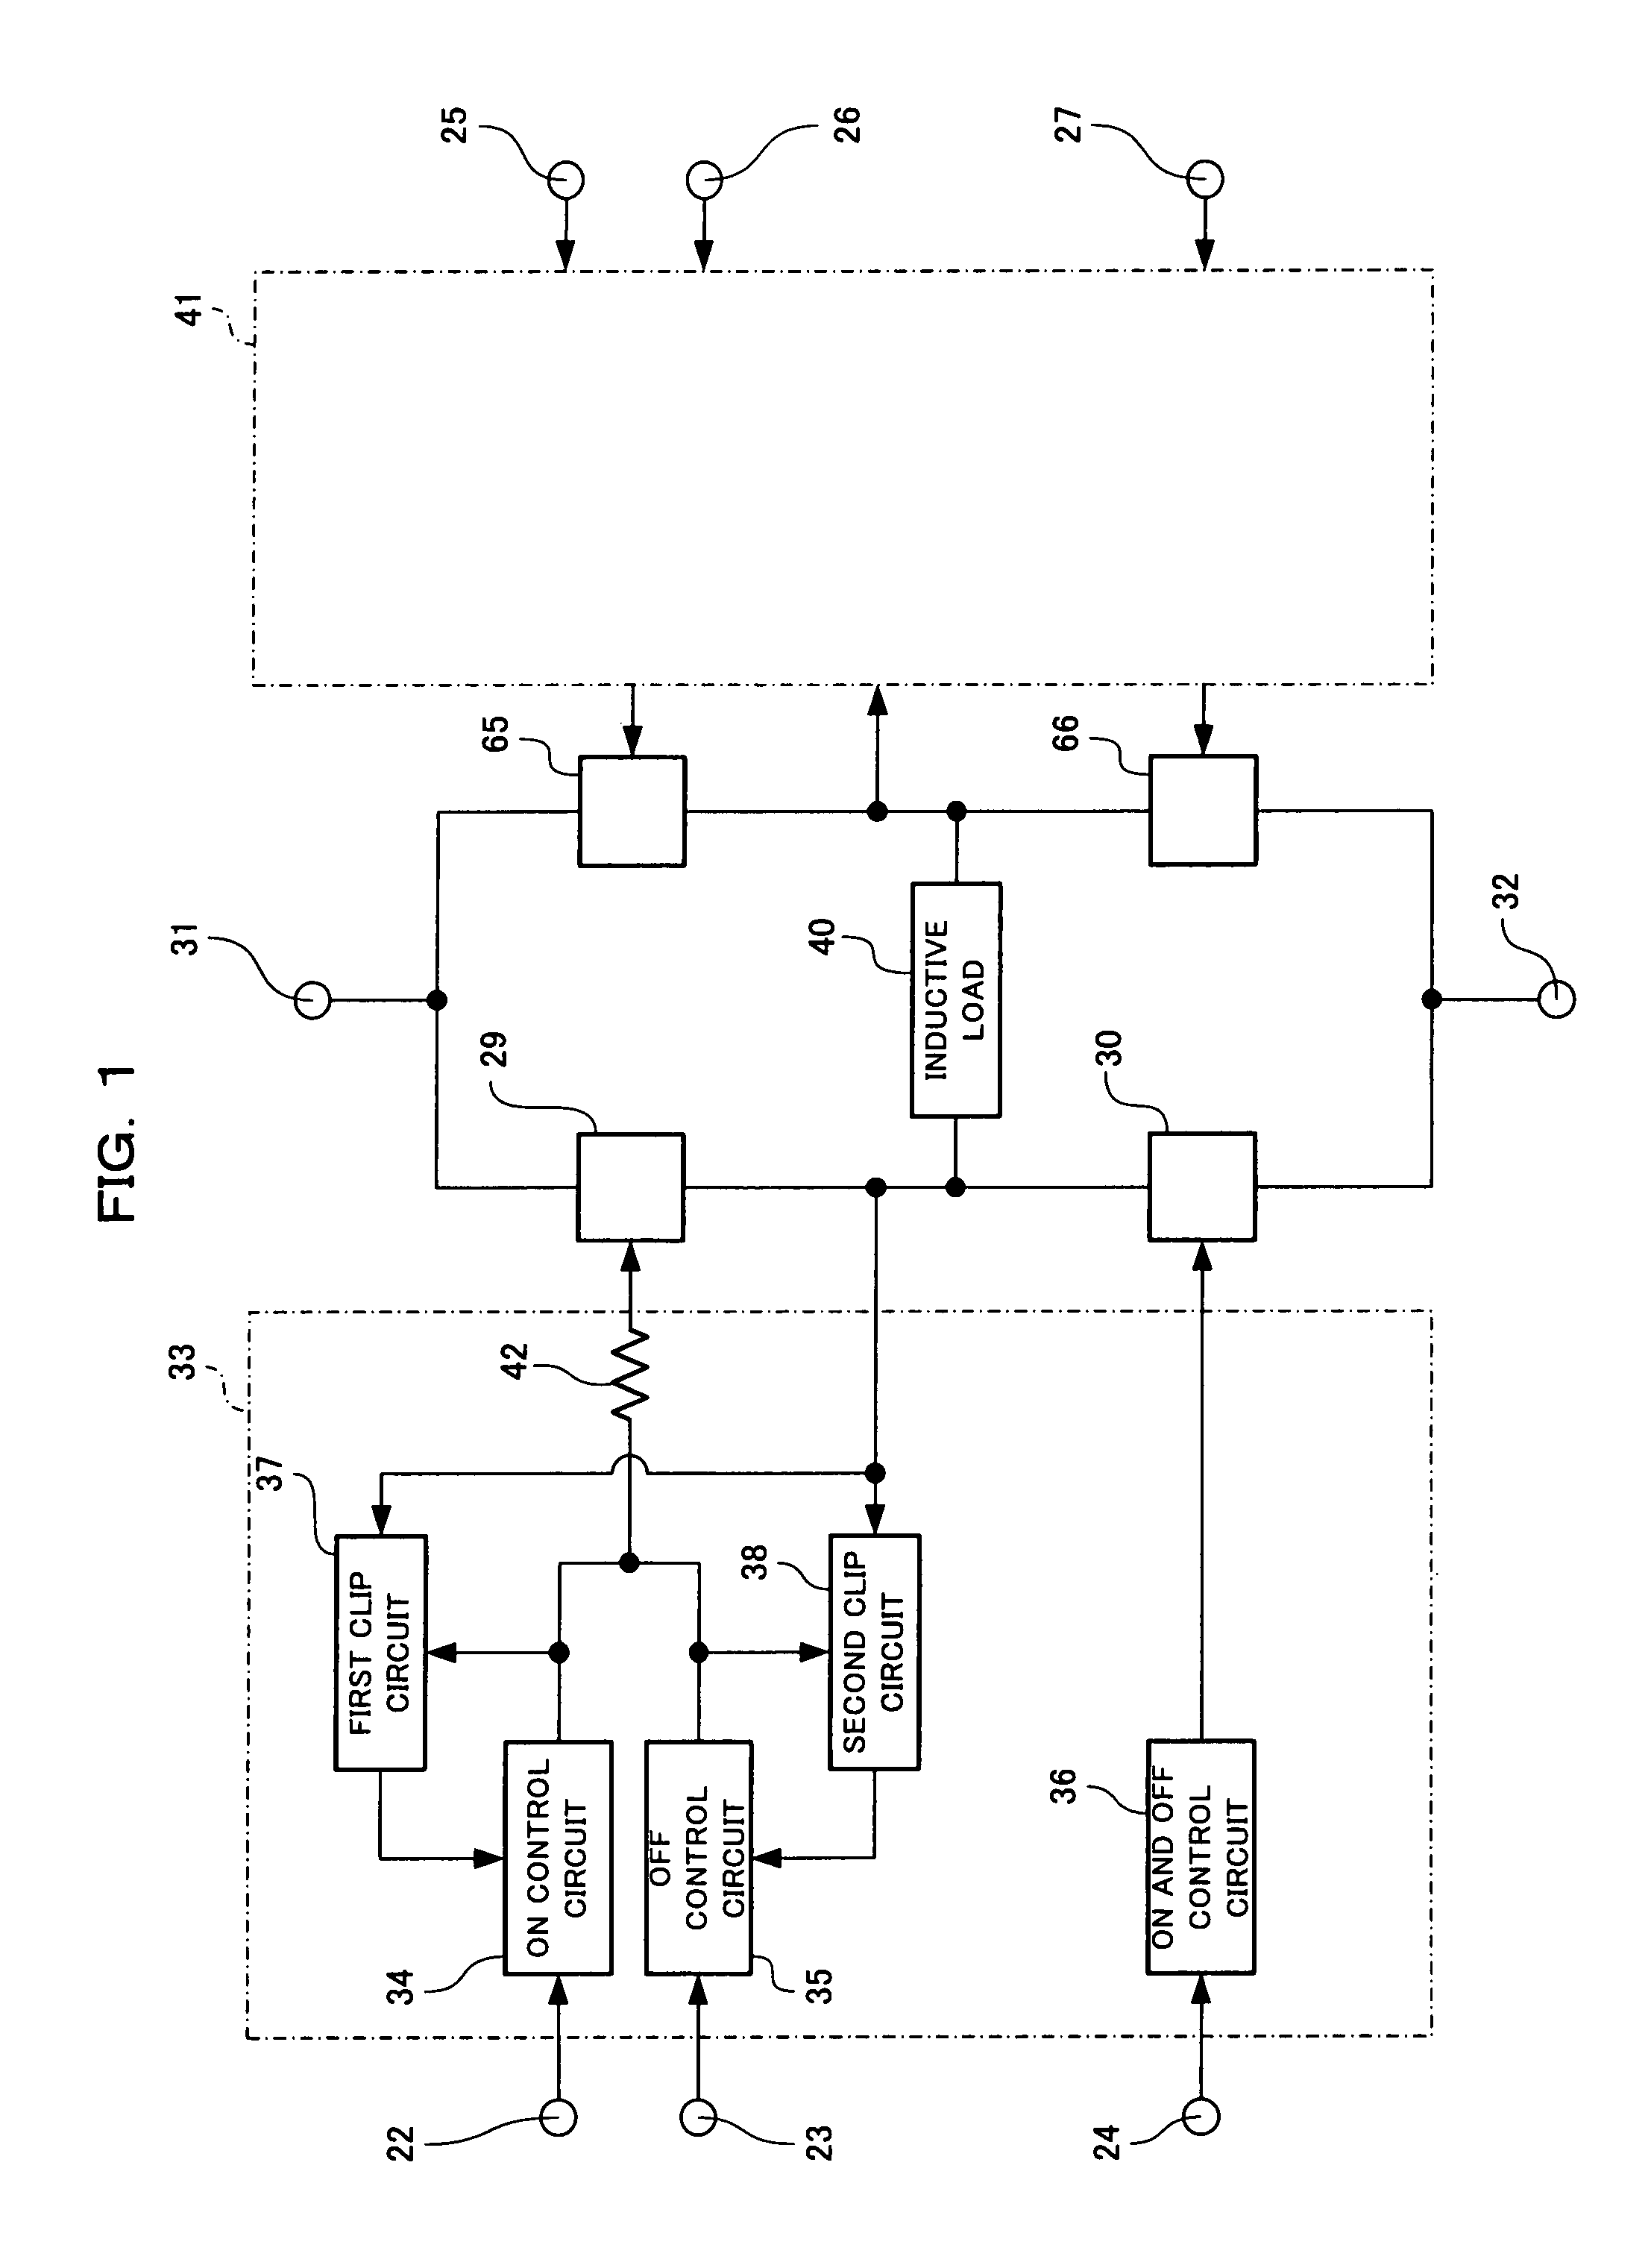 Switching control system and motor driving system